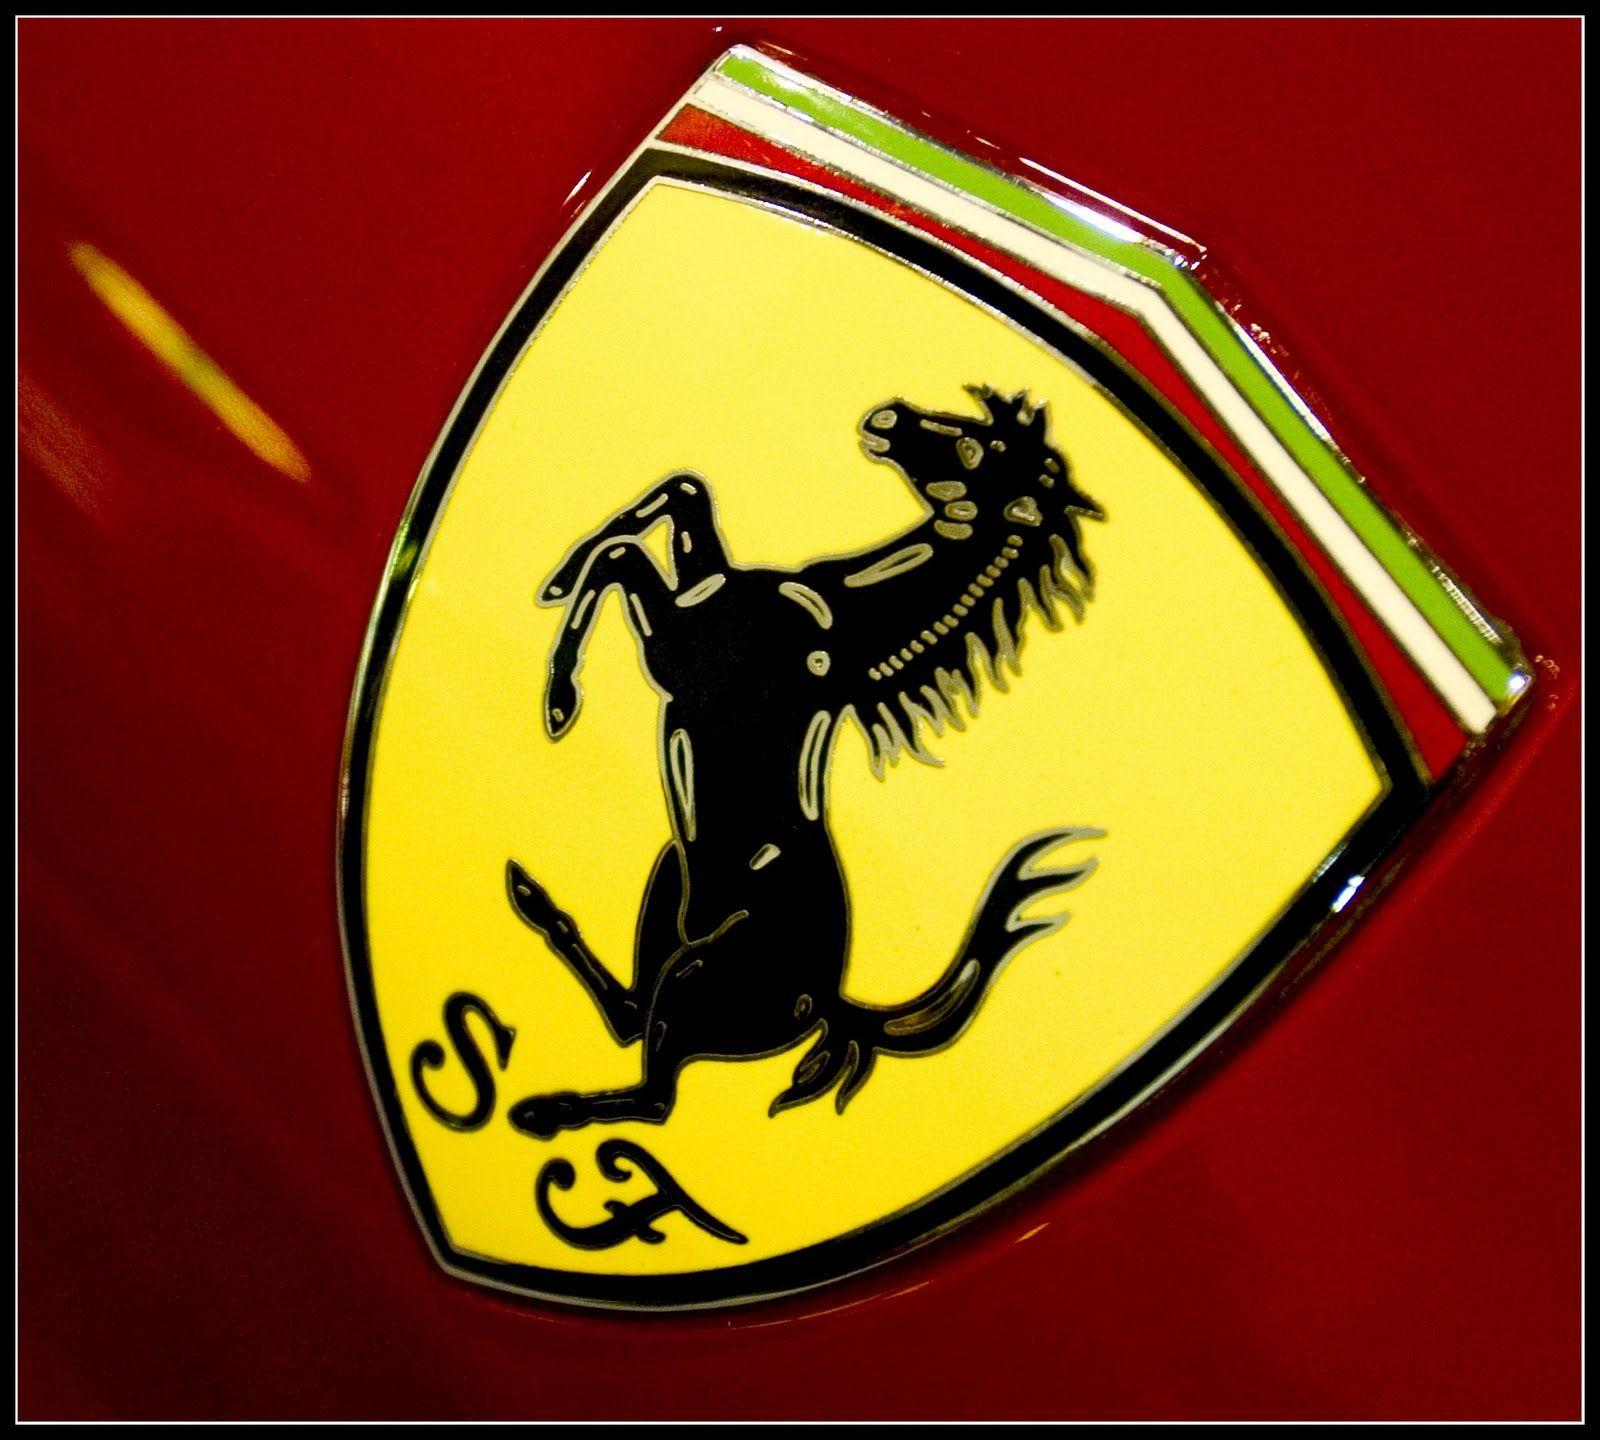 SF Horse Logo - About Ferrari Prancing Horse. The Best Logo In The World